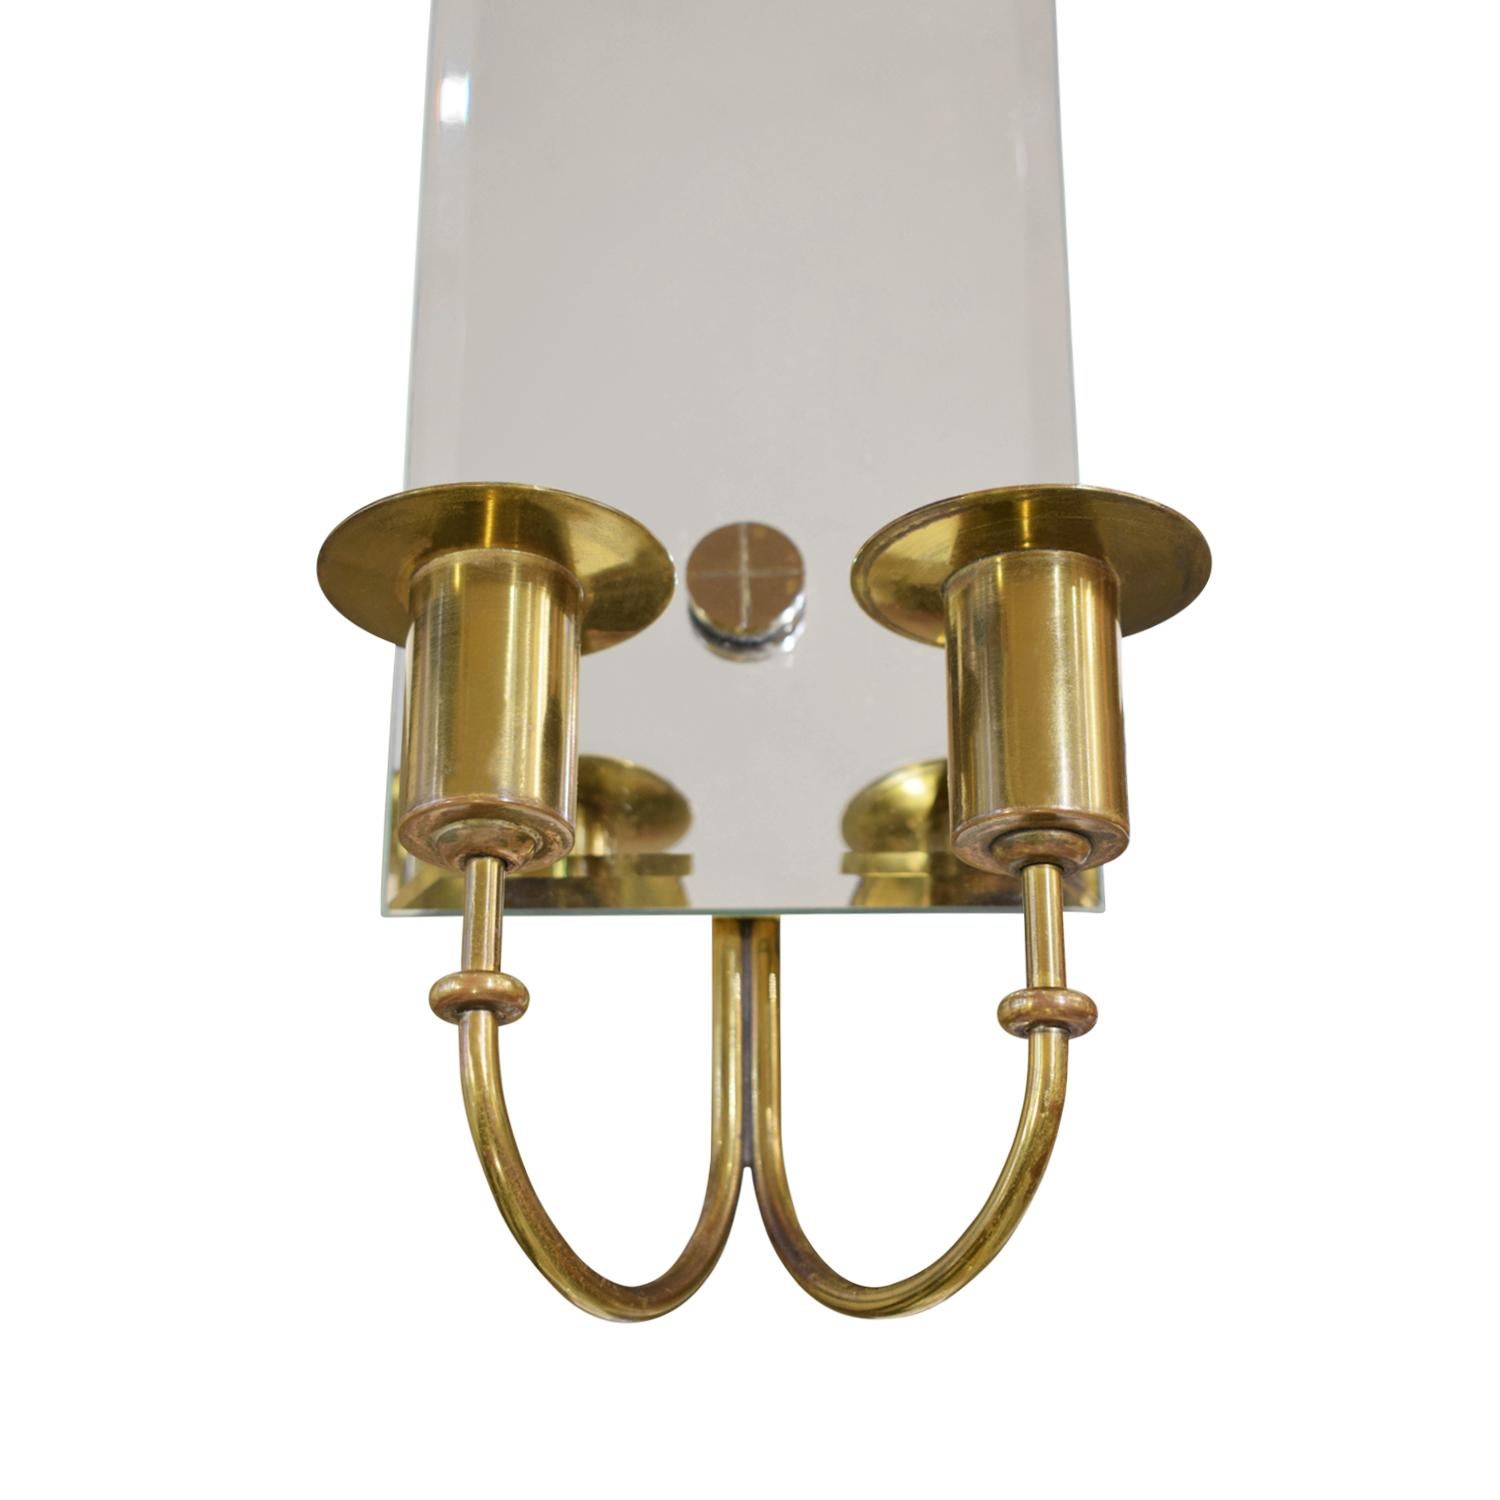 Beveled Tommi Parzinger Pair of Mirrored Sconces with Brass Candleholders, 1950s